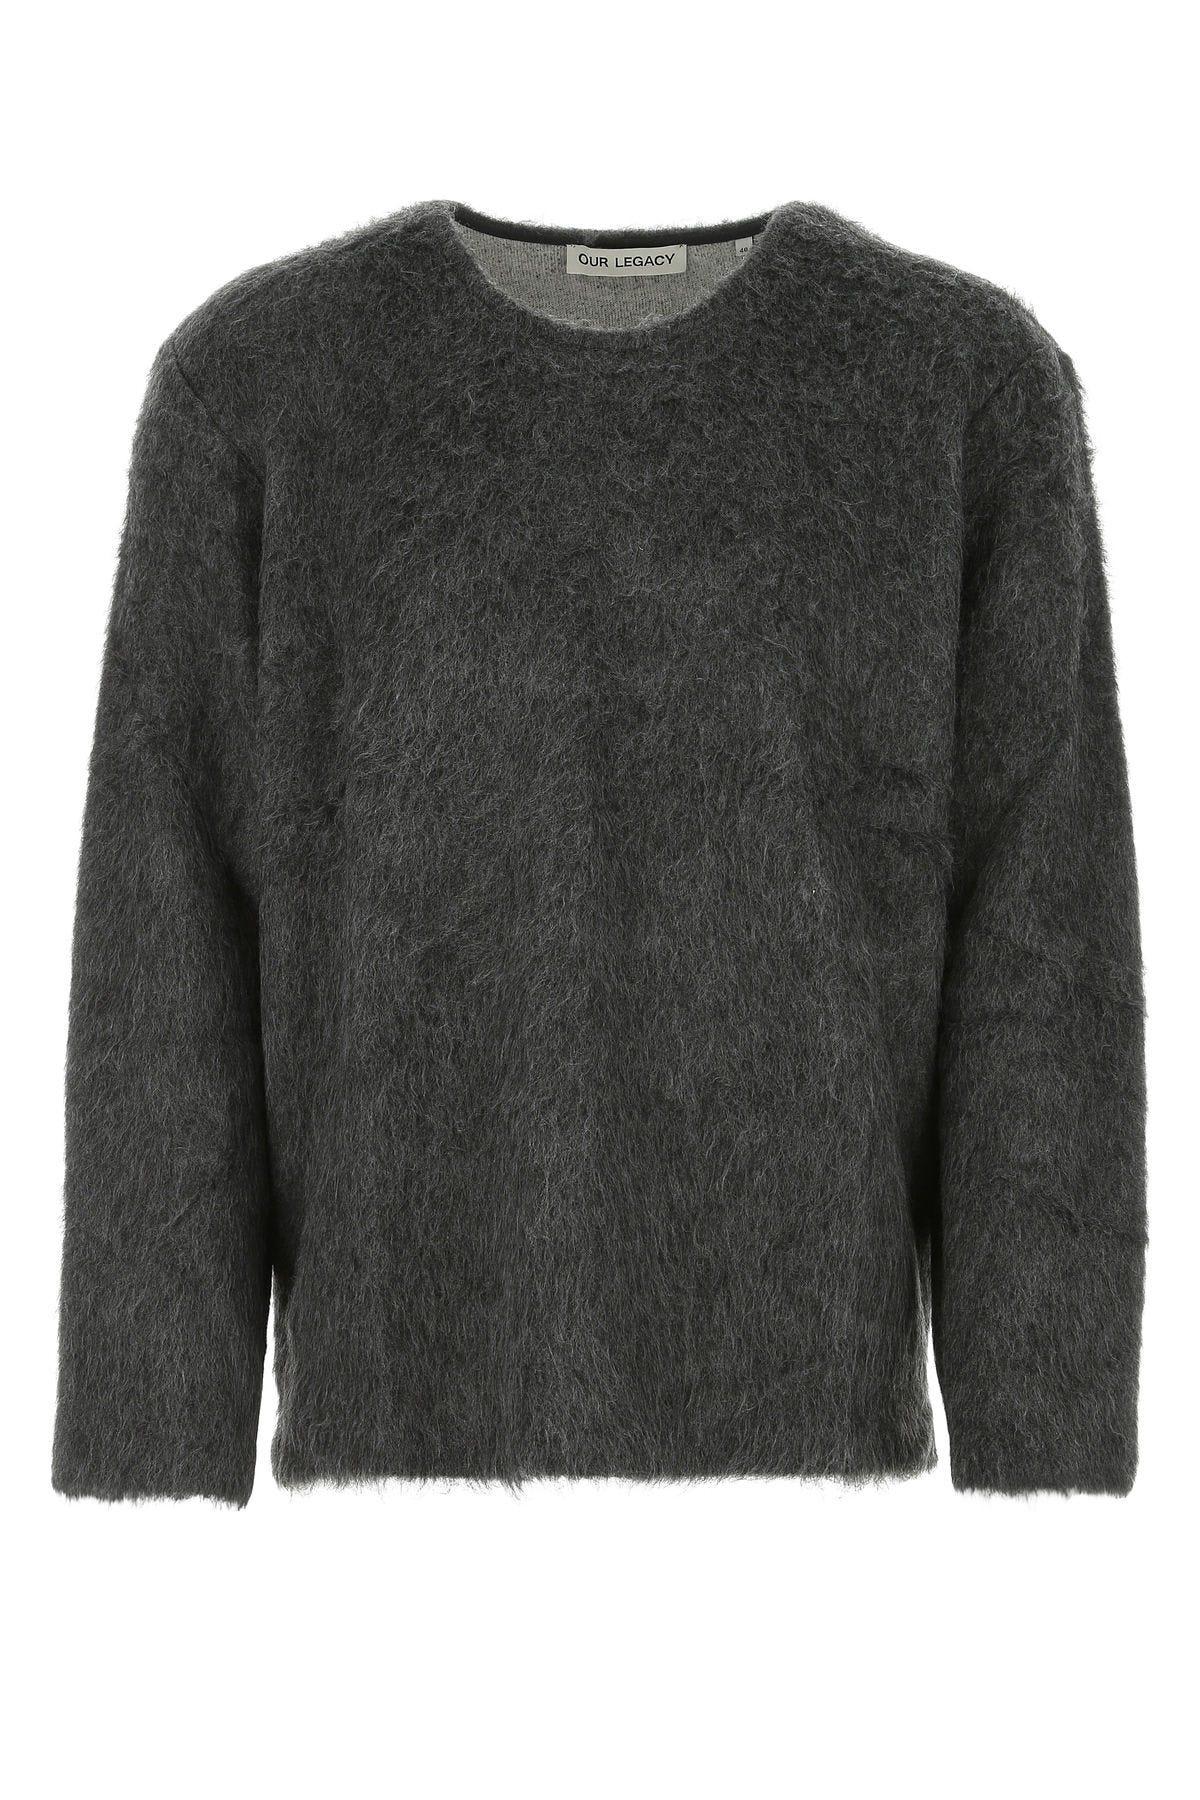 Our Legacy Charcoal Cotton Blend Oversize Sweater